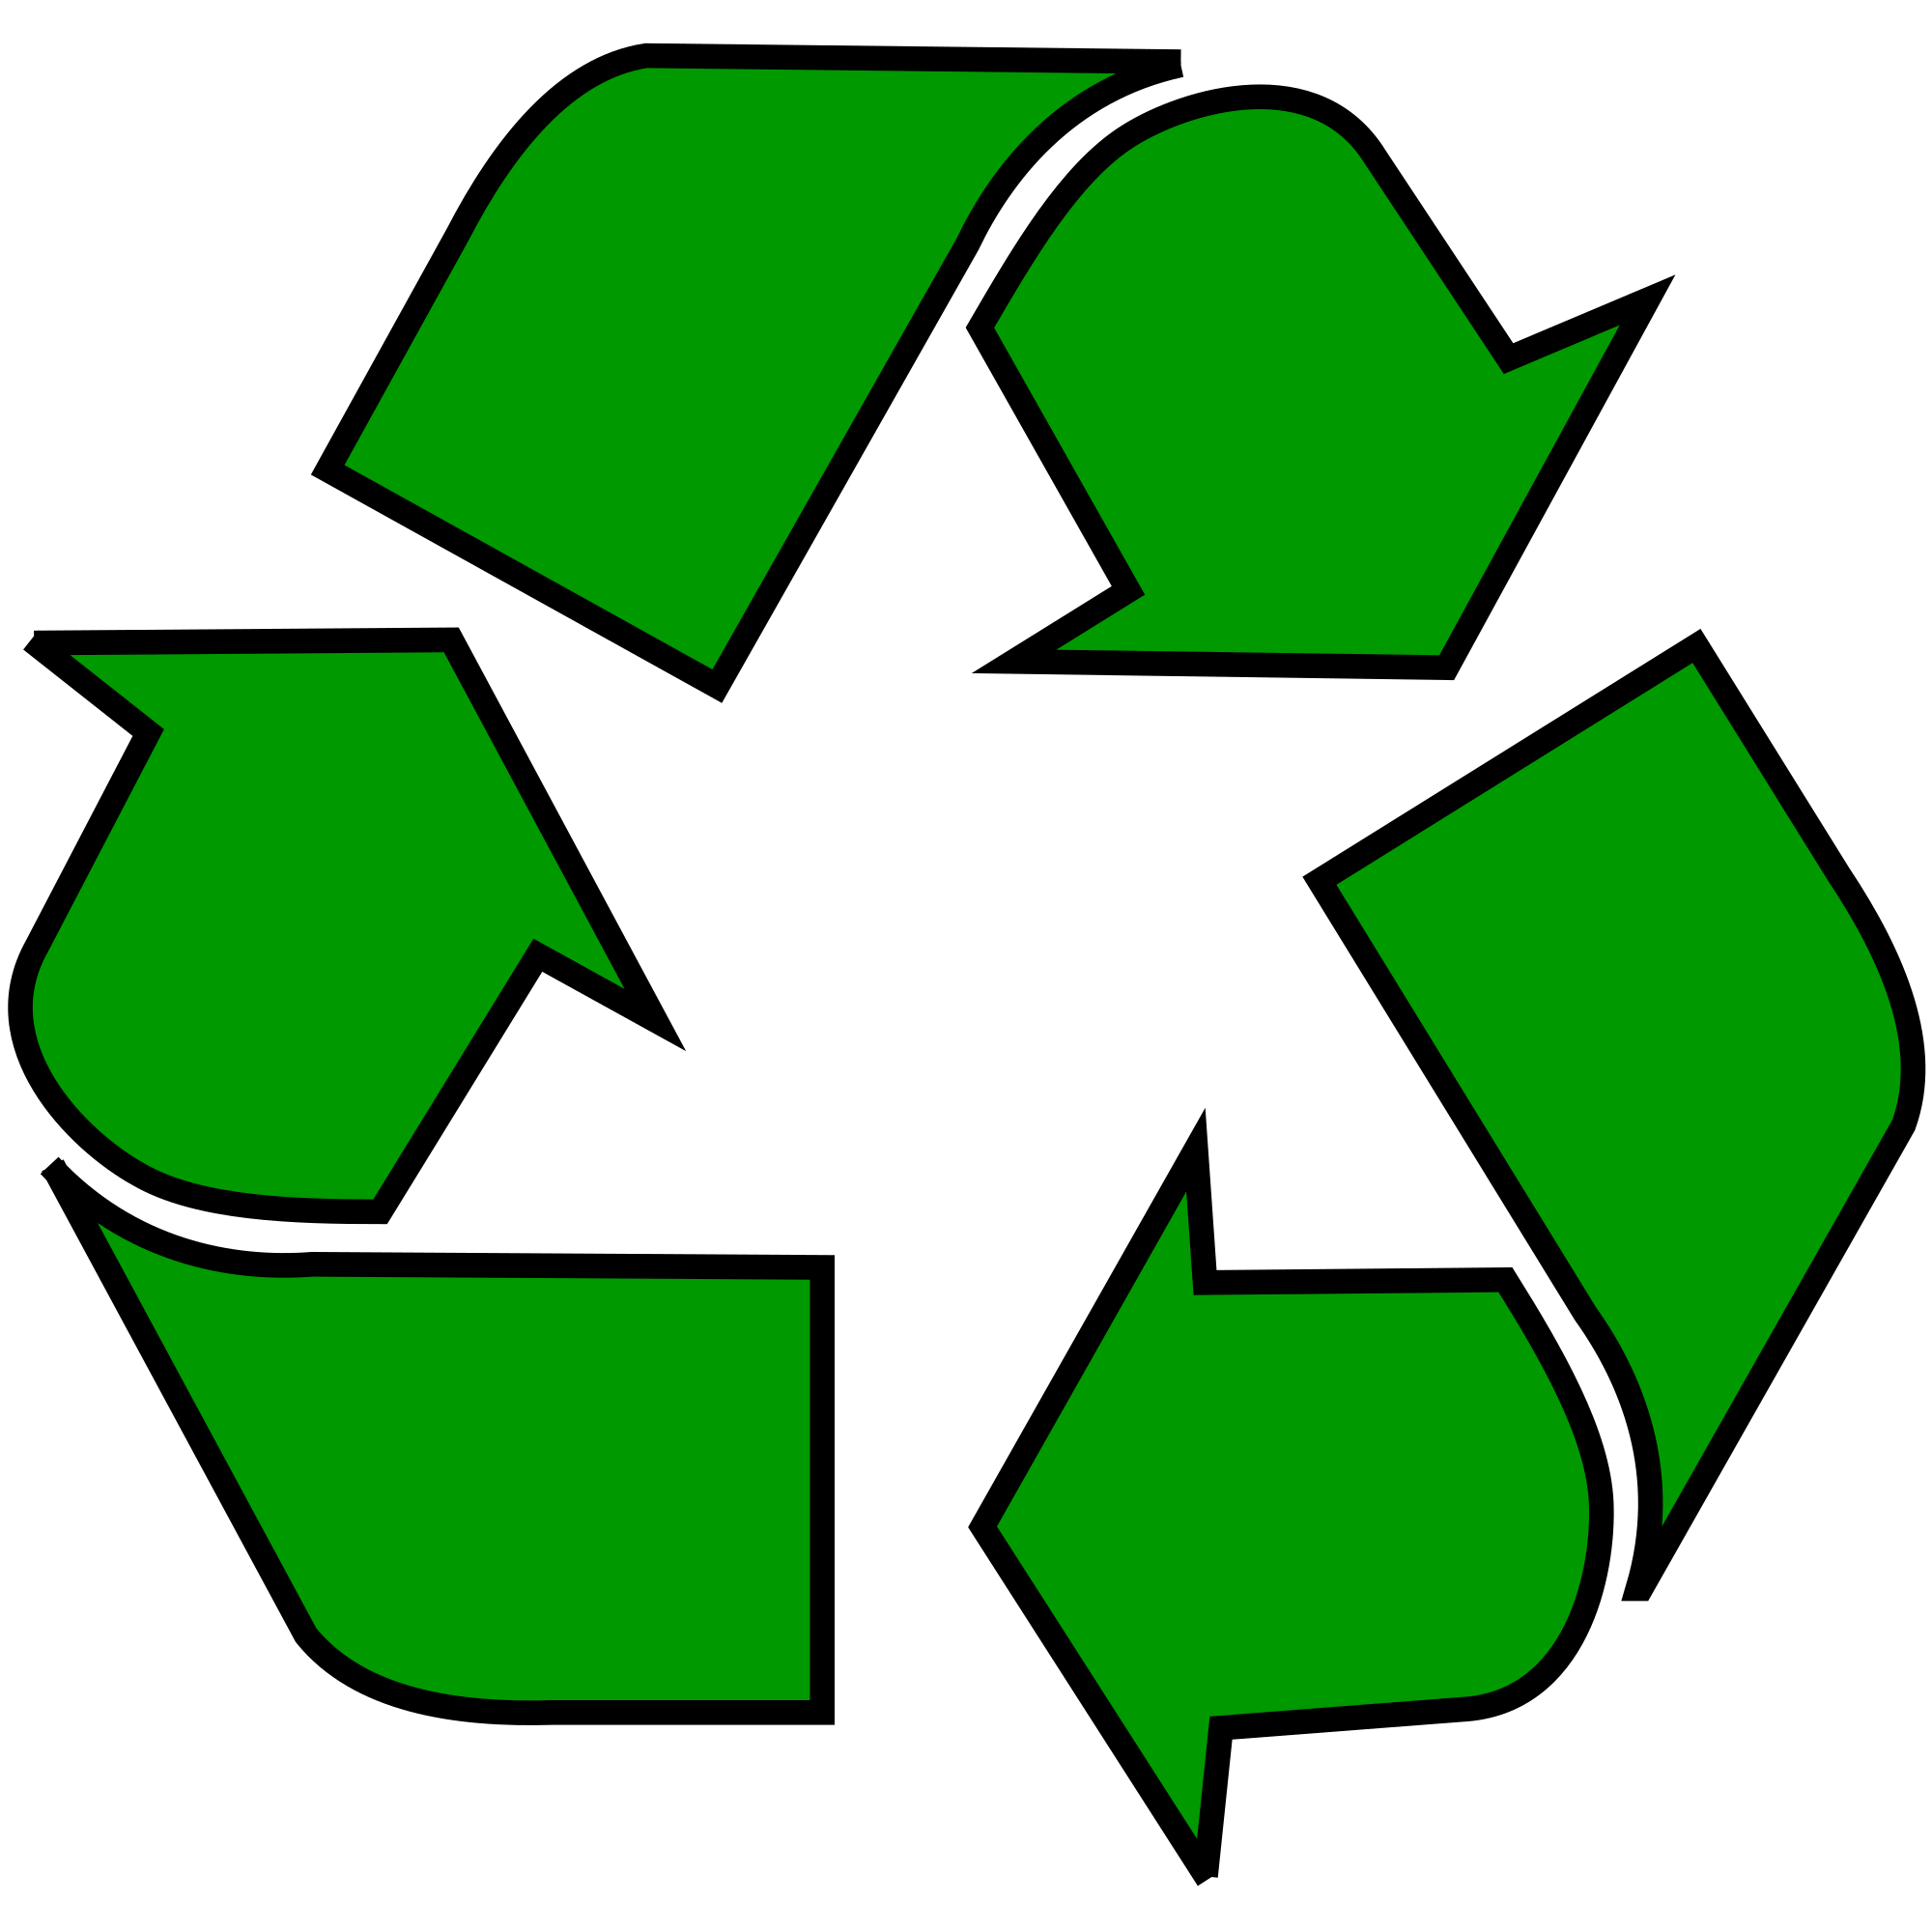 Fully Recyclable Symbol Logo Recycle